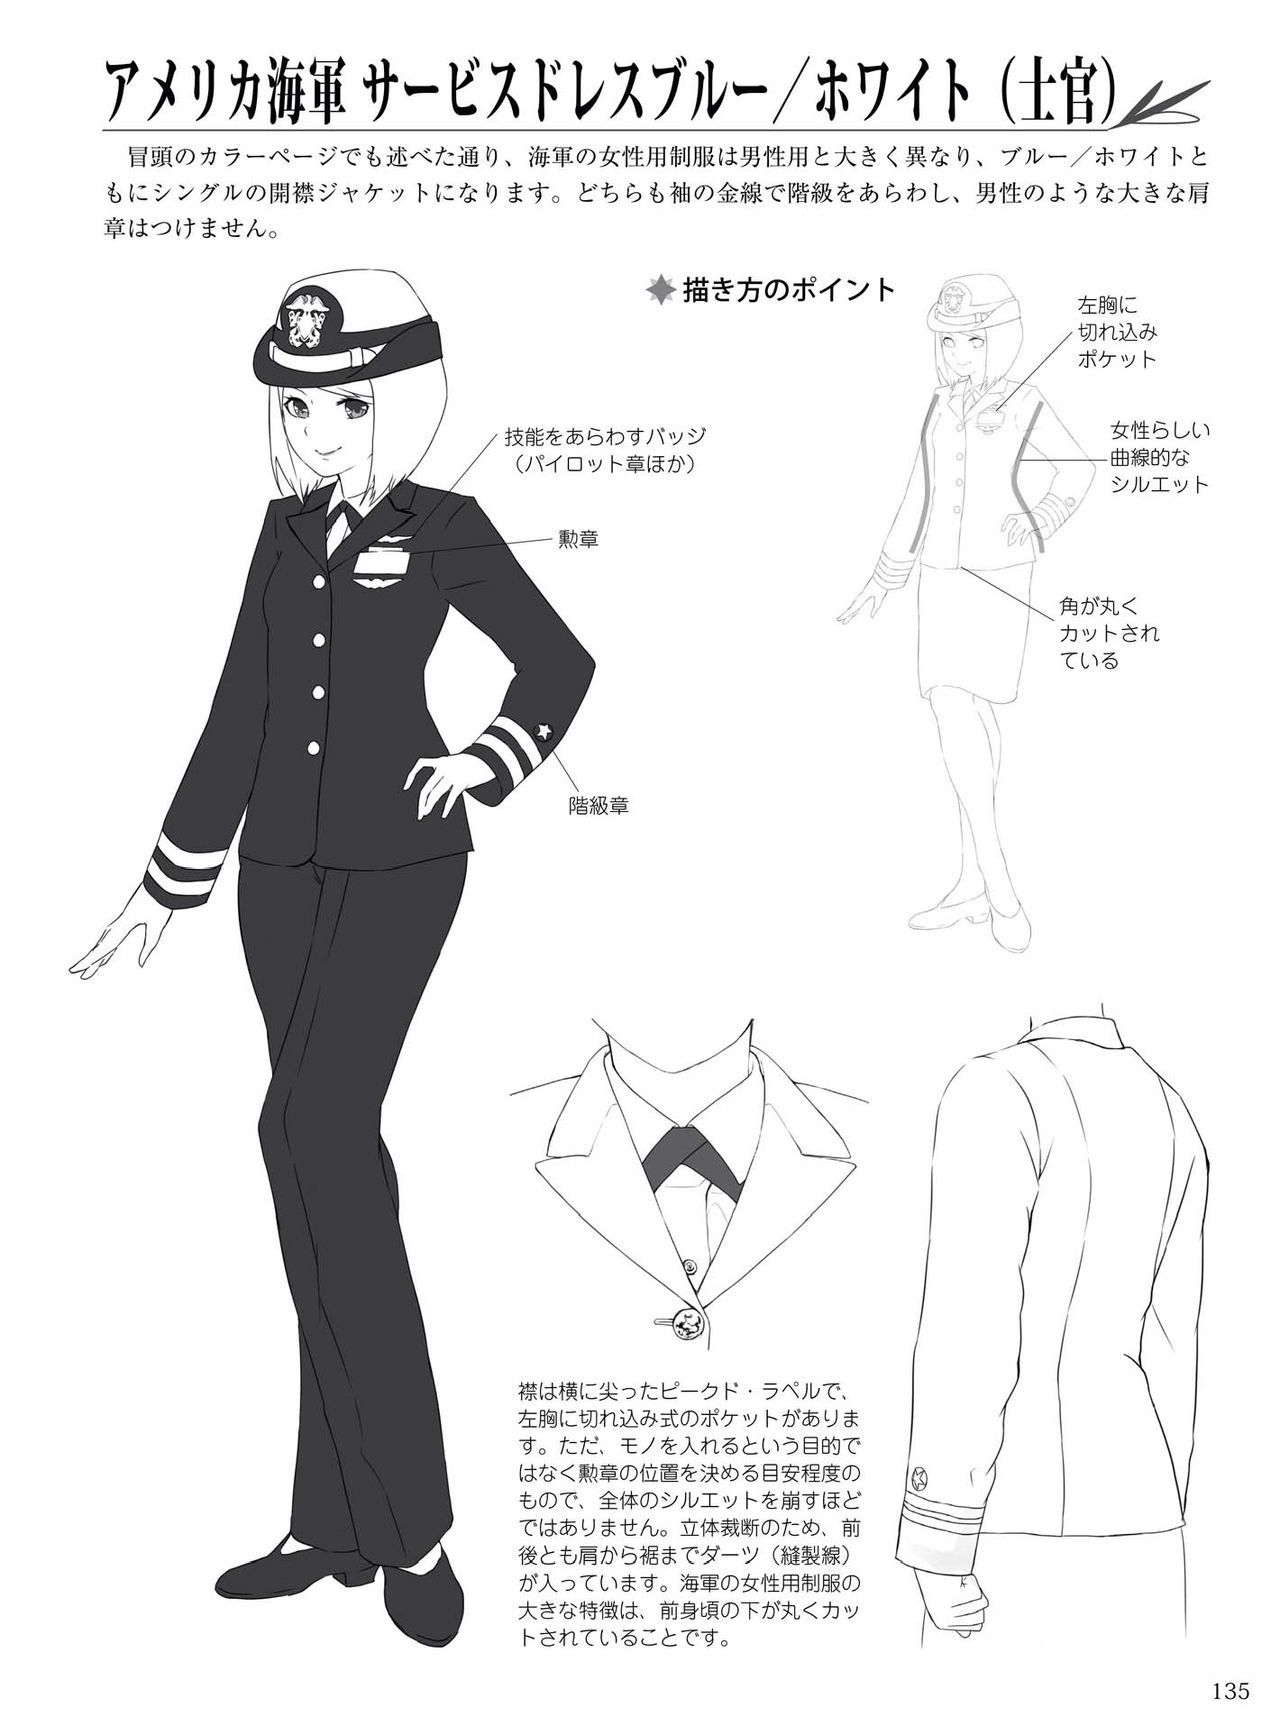 How to draw military uniforms and uniforms From Self-Defense Forces 軍服・制服の描き方 アメリカ軍・自衛隊の制服から戦闘服まで 138